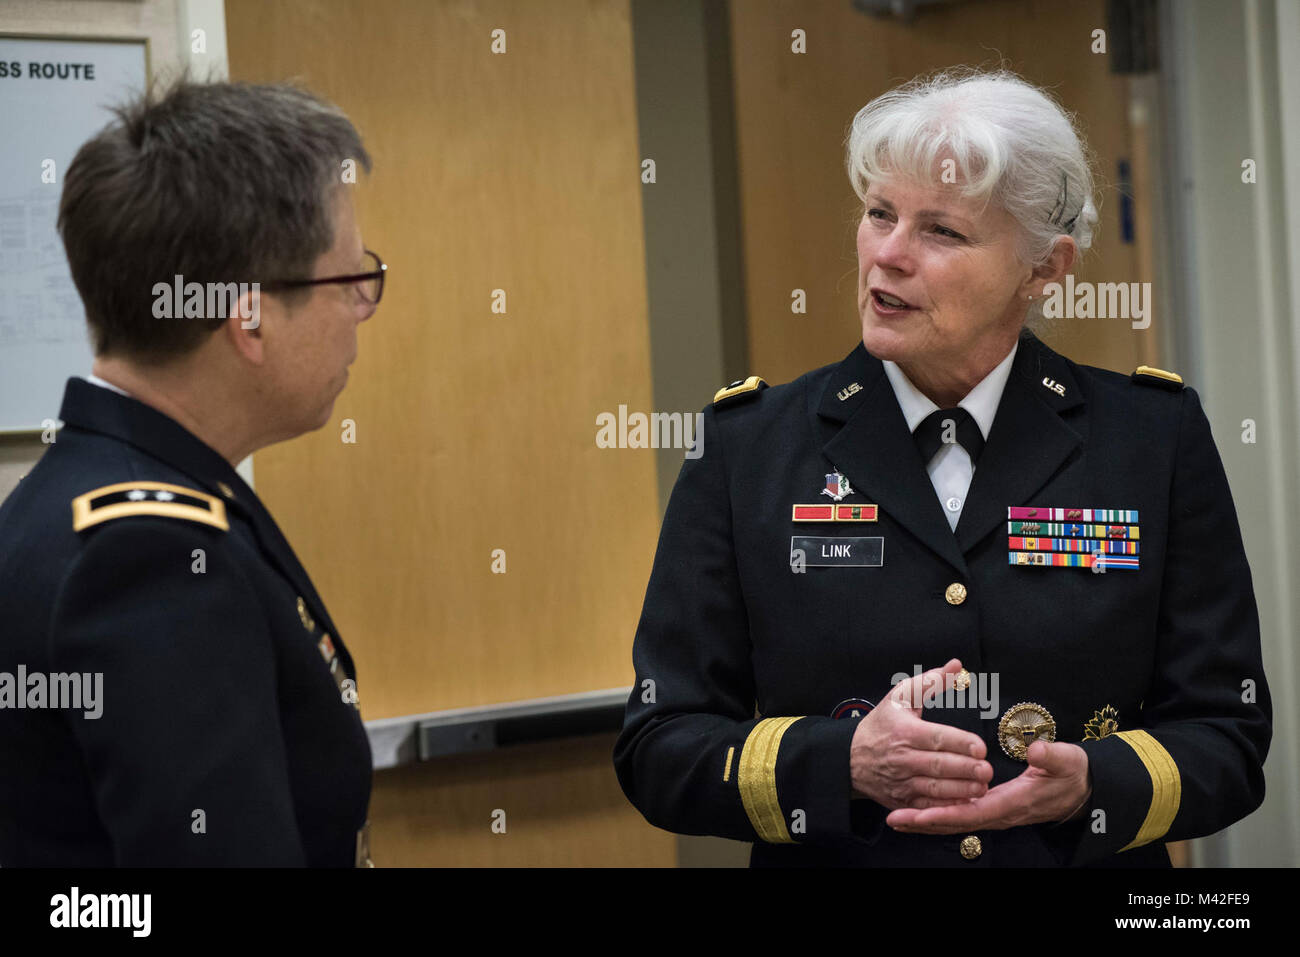 Maj. Gen. Mary Link, commanding general for Army Reserve Medical Command, speaks with Maj. Gen. Tammy Smith, assistant deputy chief of staff for Mobilization and Reserve Affairs before participating in the Women Leadership Roundtable Discussion, hosted at the Pentagon, Feb. 7, 2018. Top U.S. military generals met with congressional delegates to discuss their life perspectives as military women and the importance of having access to every talented American who can add strength to the force. (U.S. Army Reserve Stock Photo